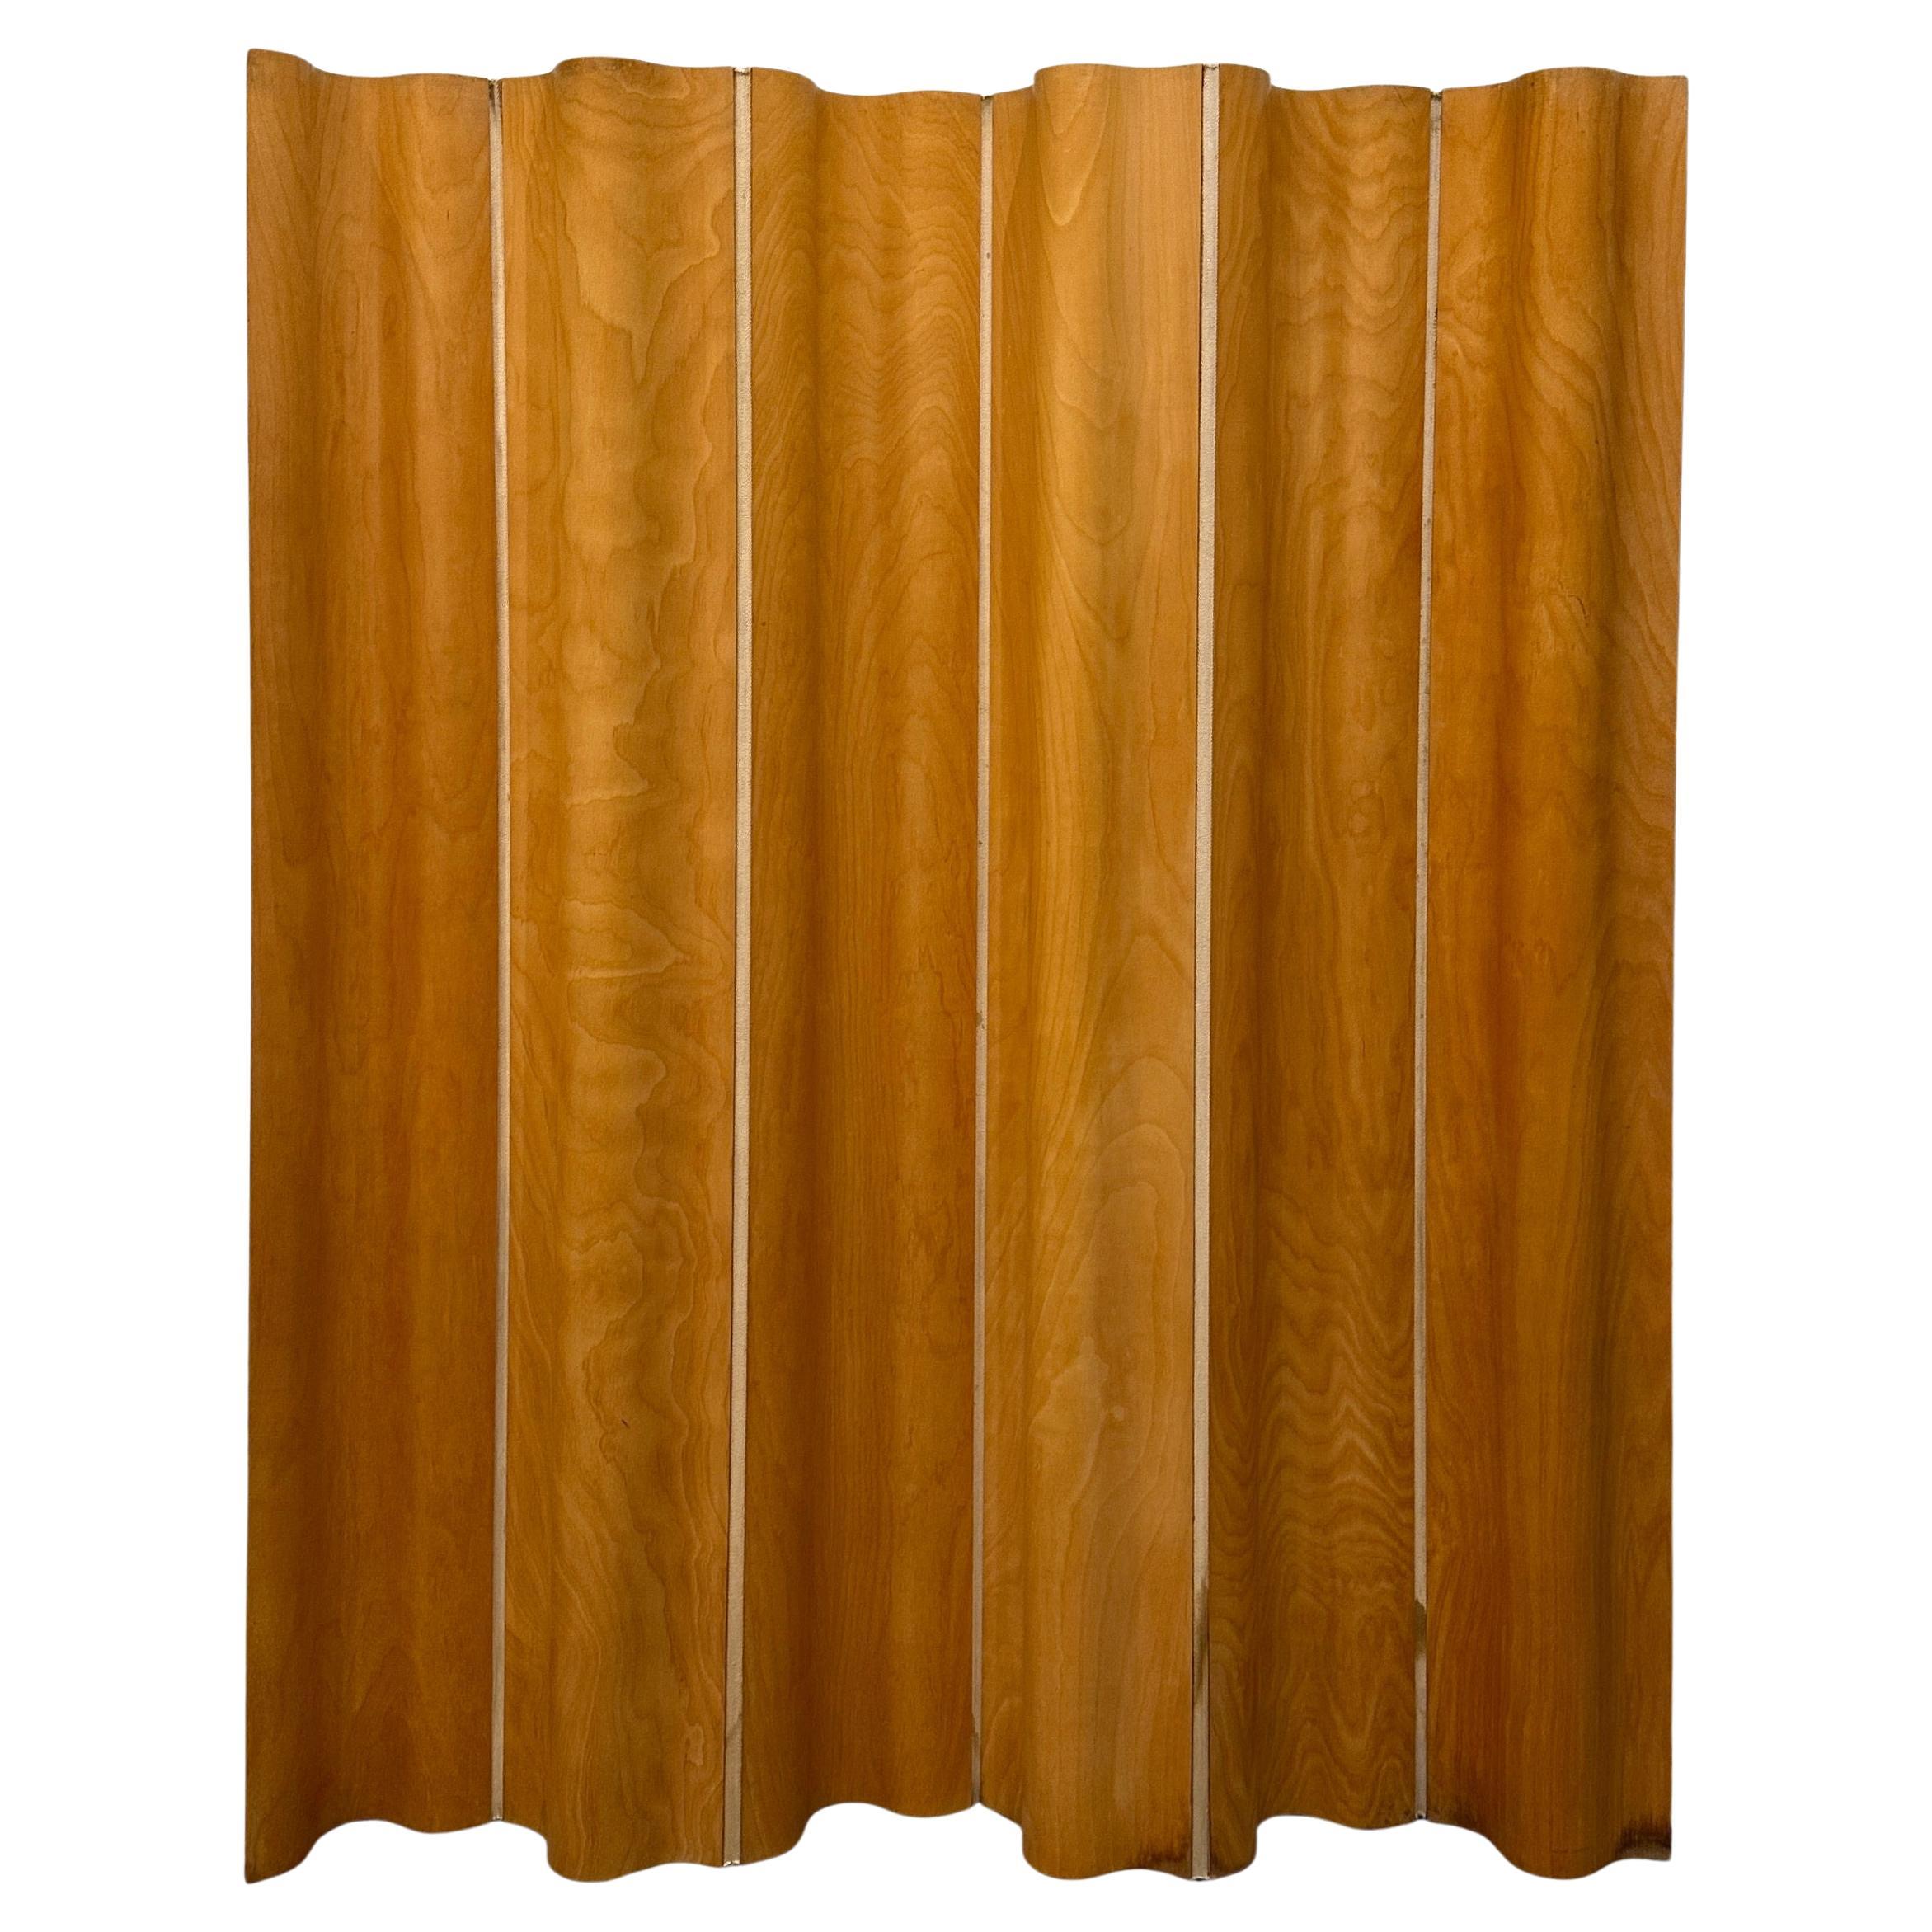 Charles and Ray Eames for Herman Miller Plywood Folding Screen Ash Veneer 1950s For Sale